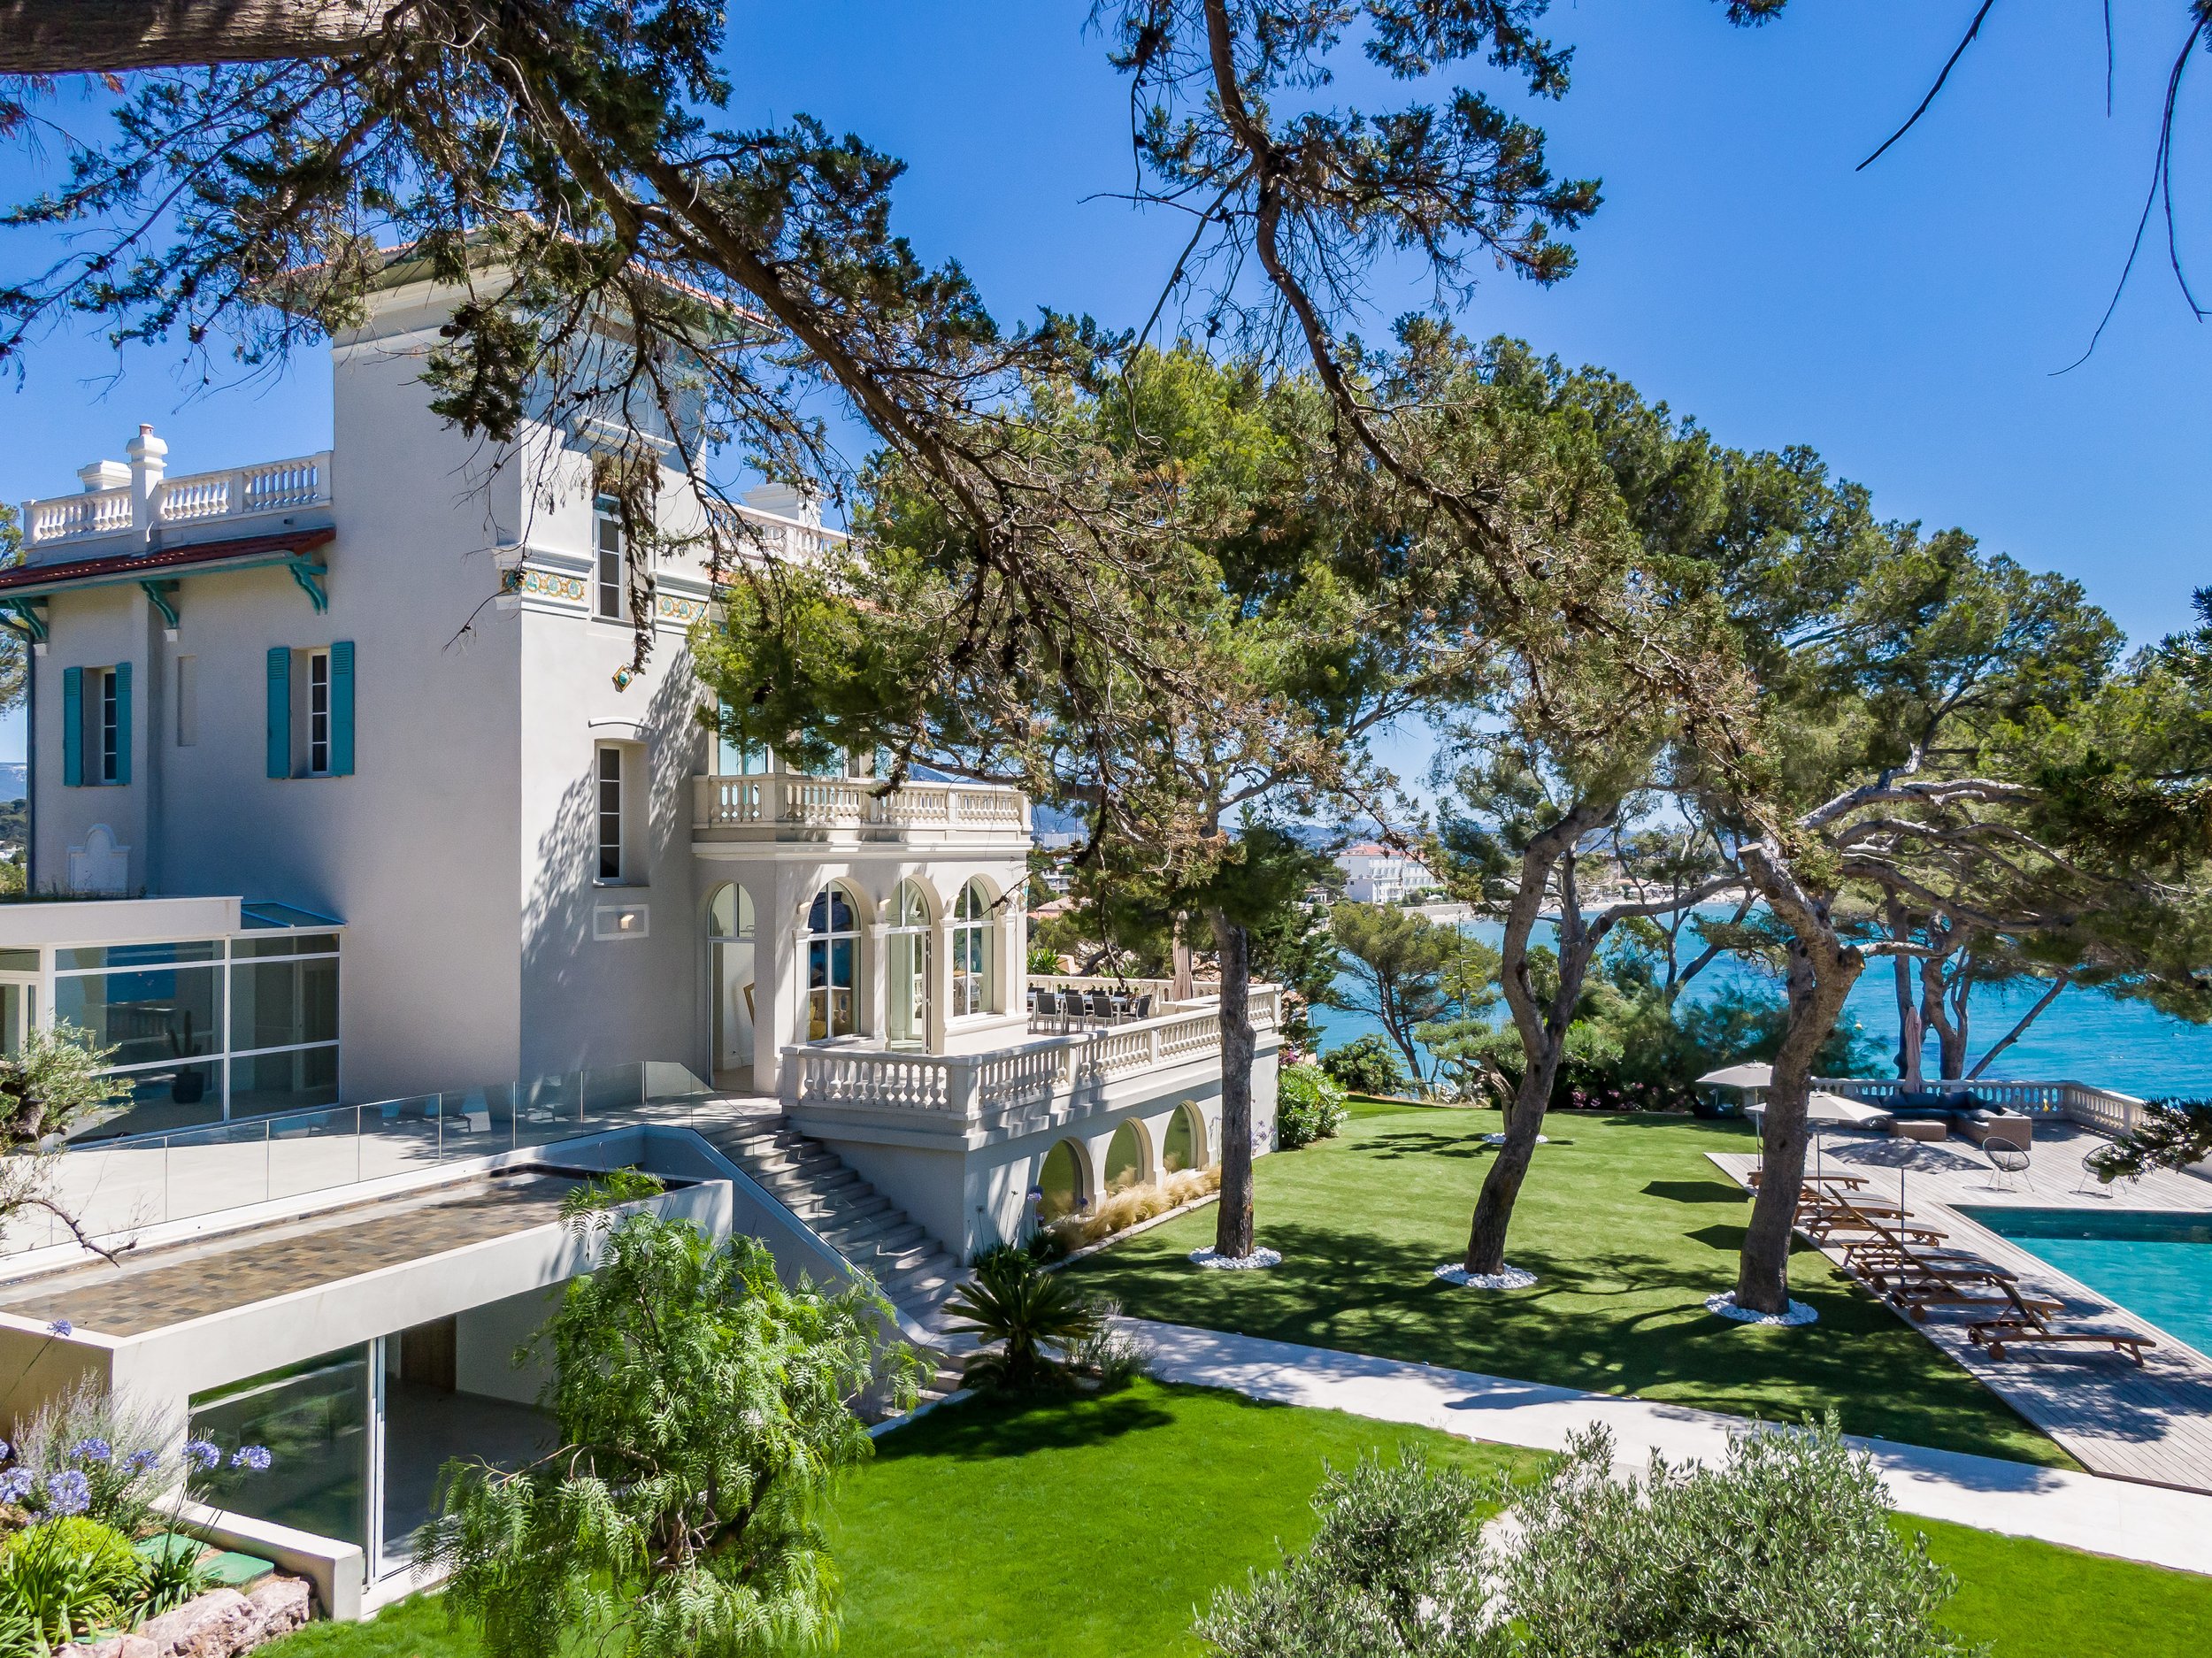 Luxury villa in Toulon to organize an incentive